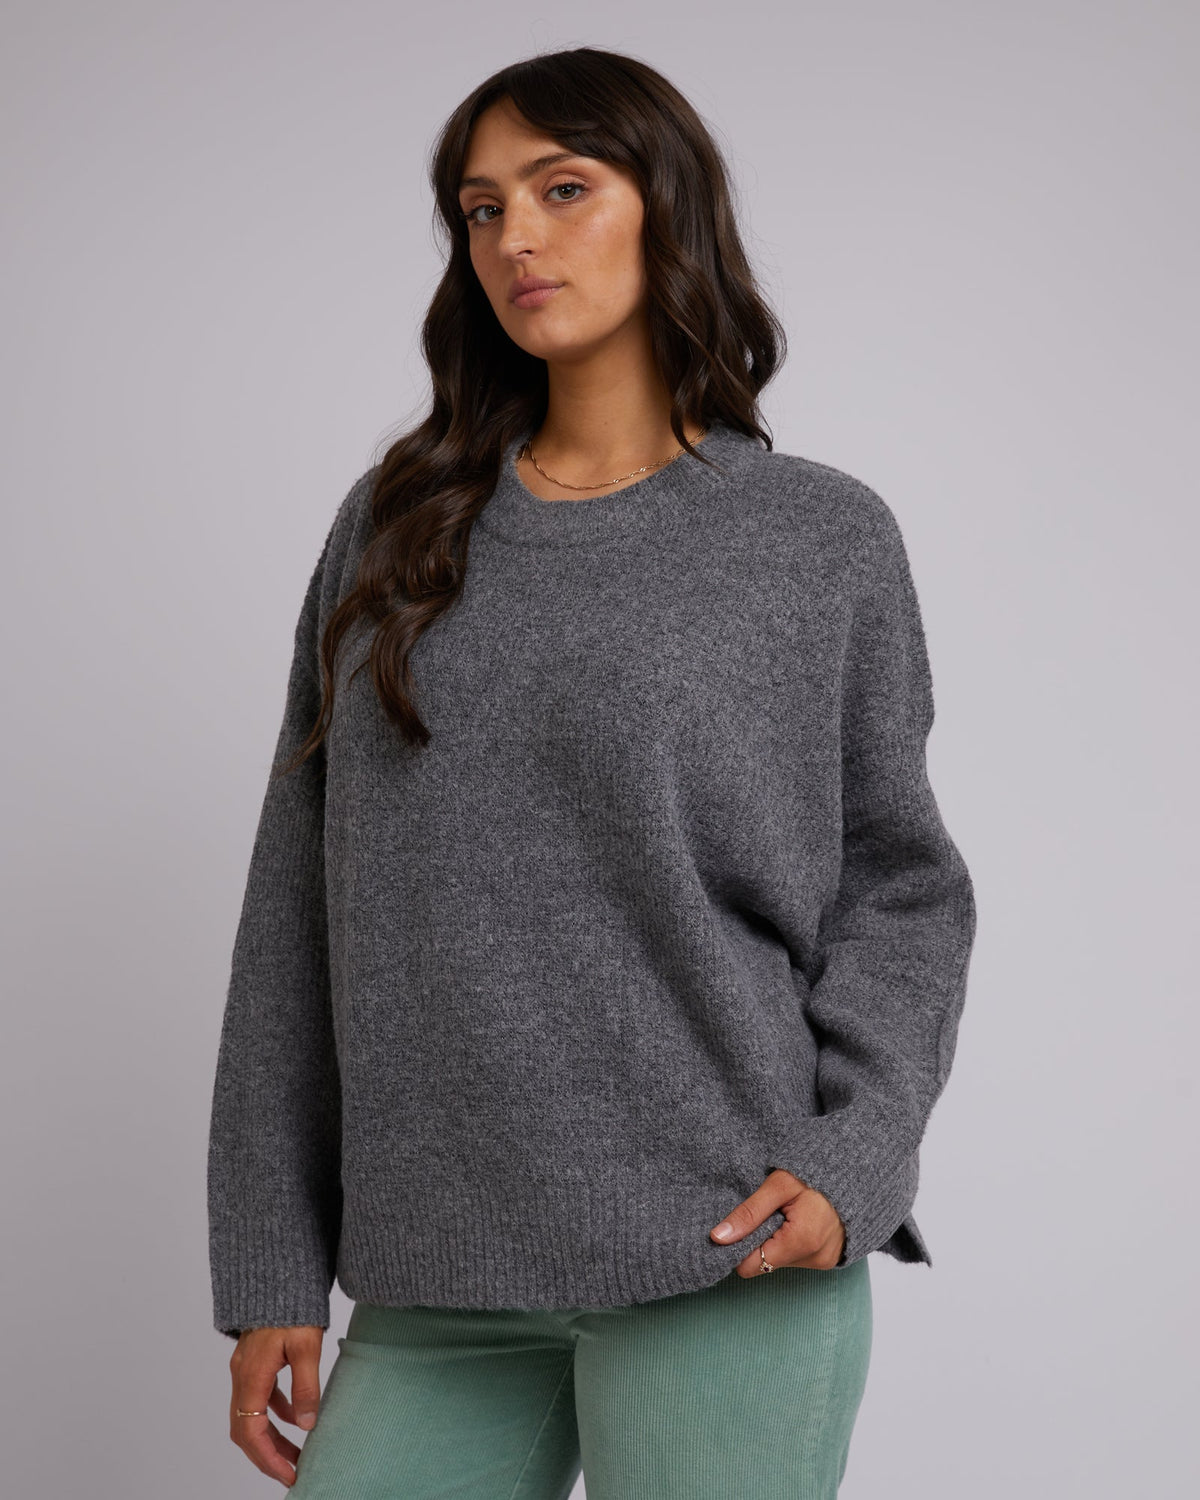 All About Eve-Kendal Knit Charcoal-Edge Clothing